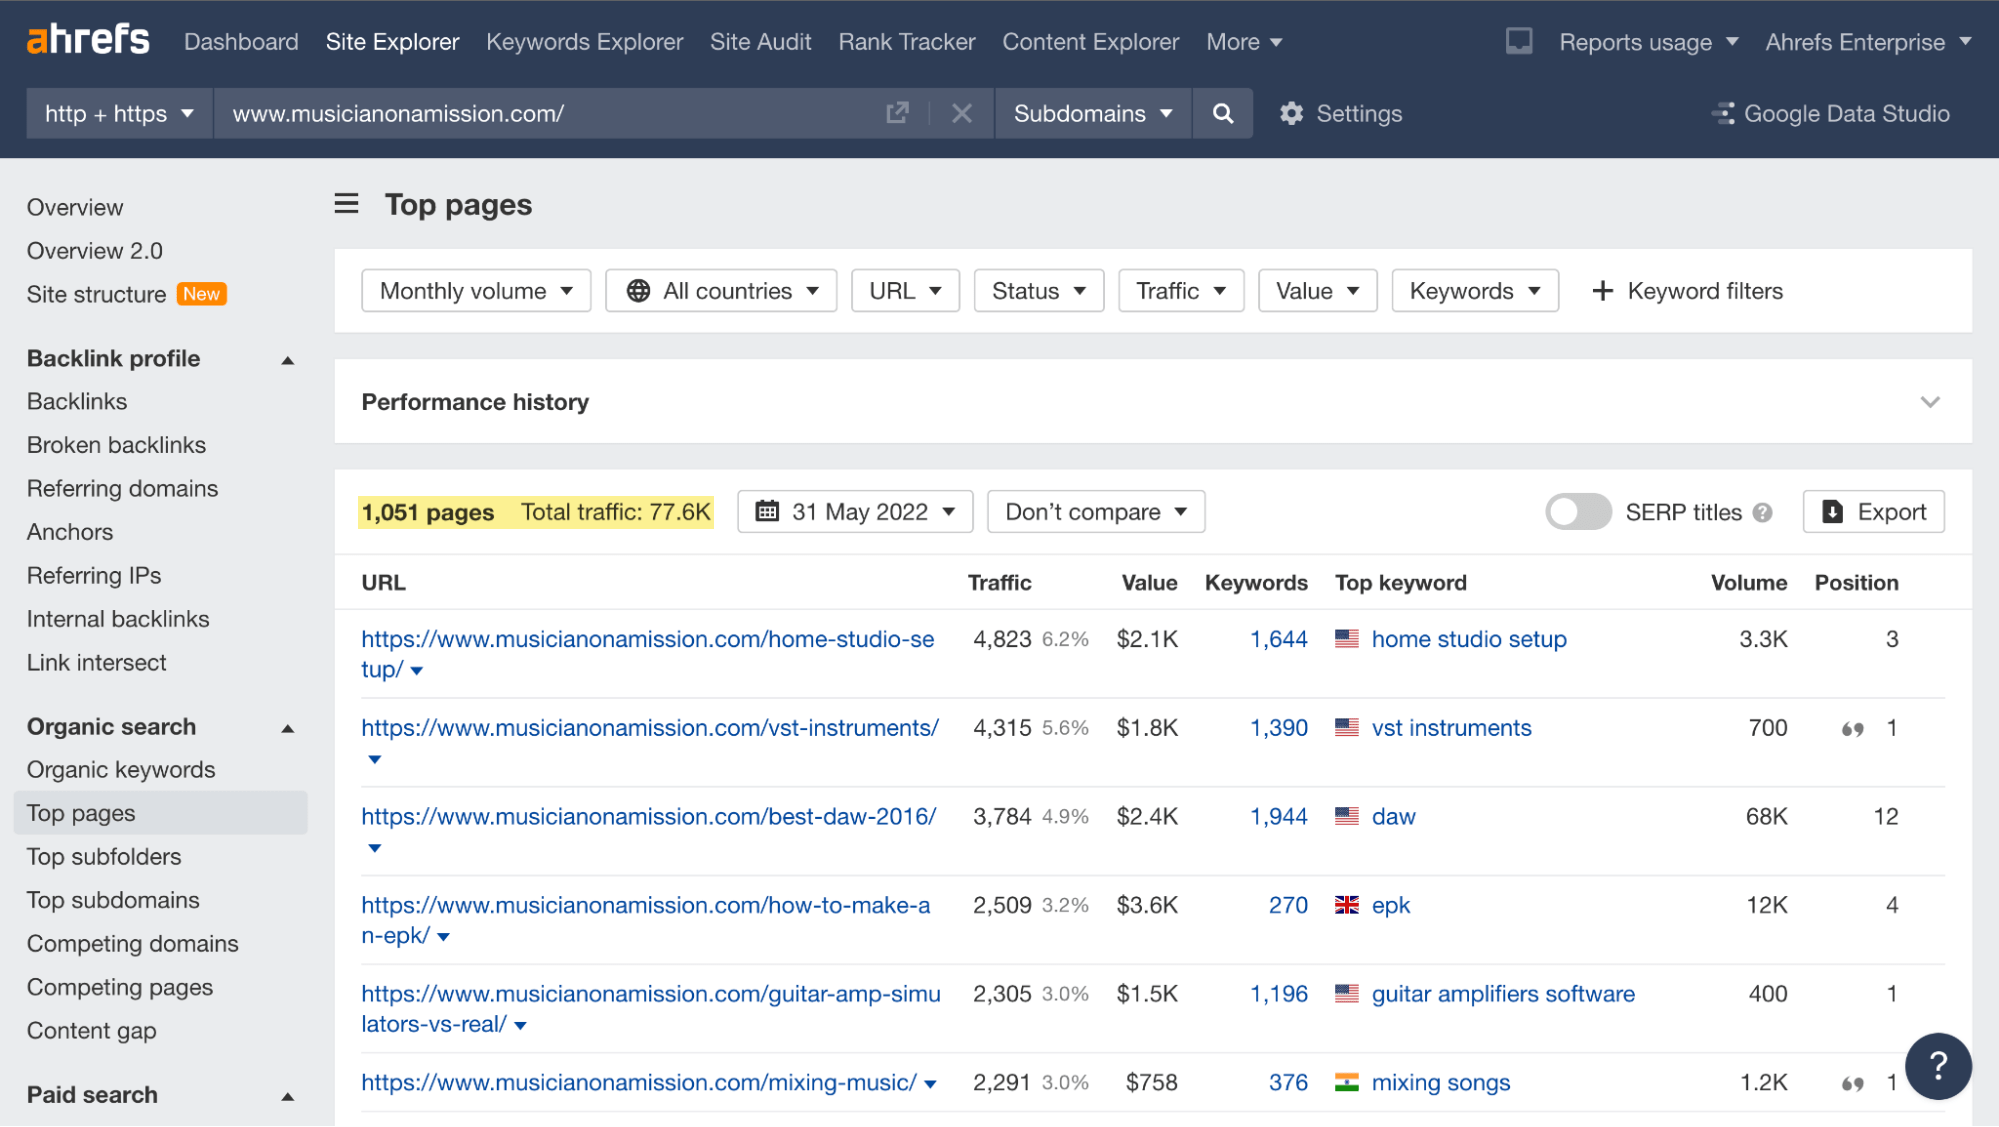 Top pages by traffic in Ahrefs' Site Explorer